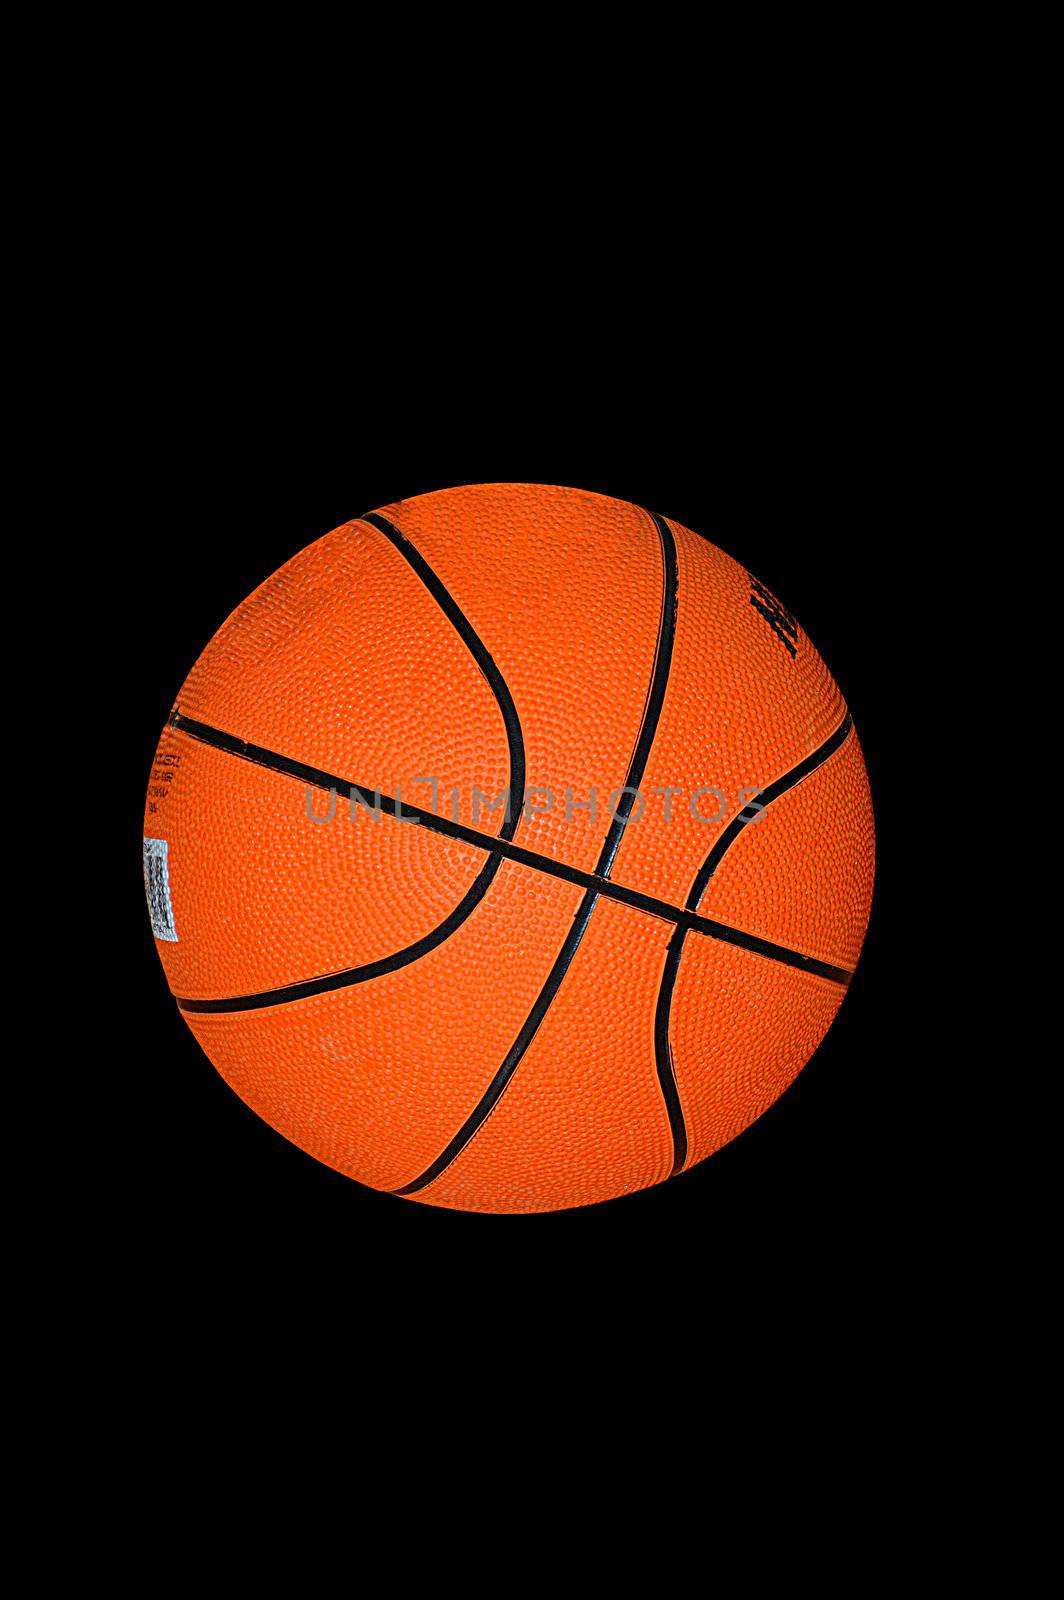 Basket ball isolated on a black back ground